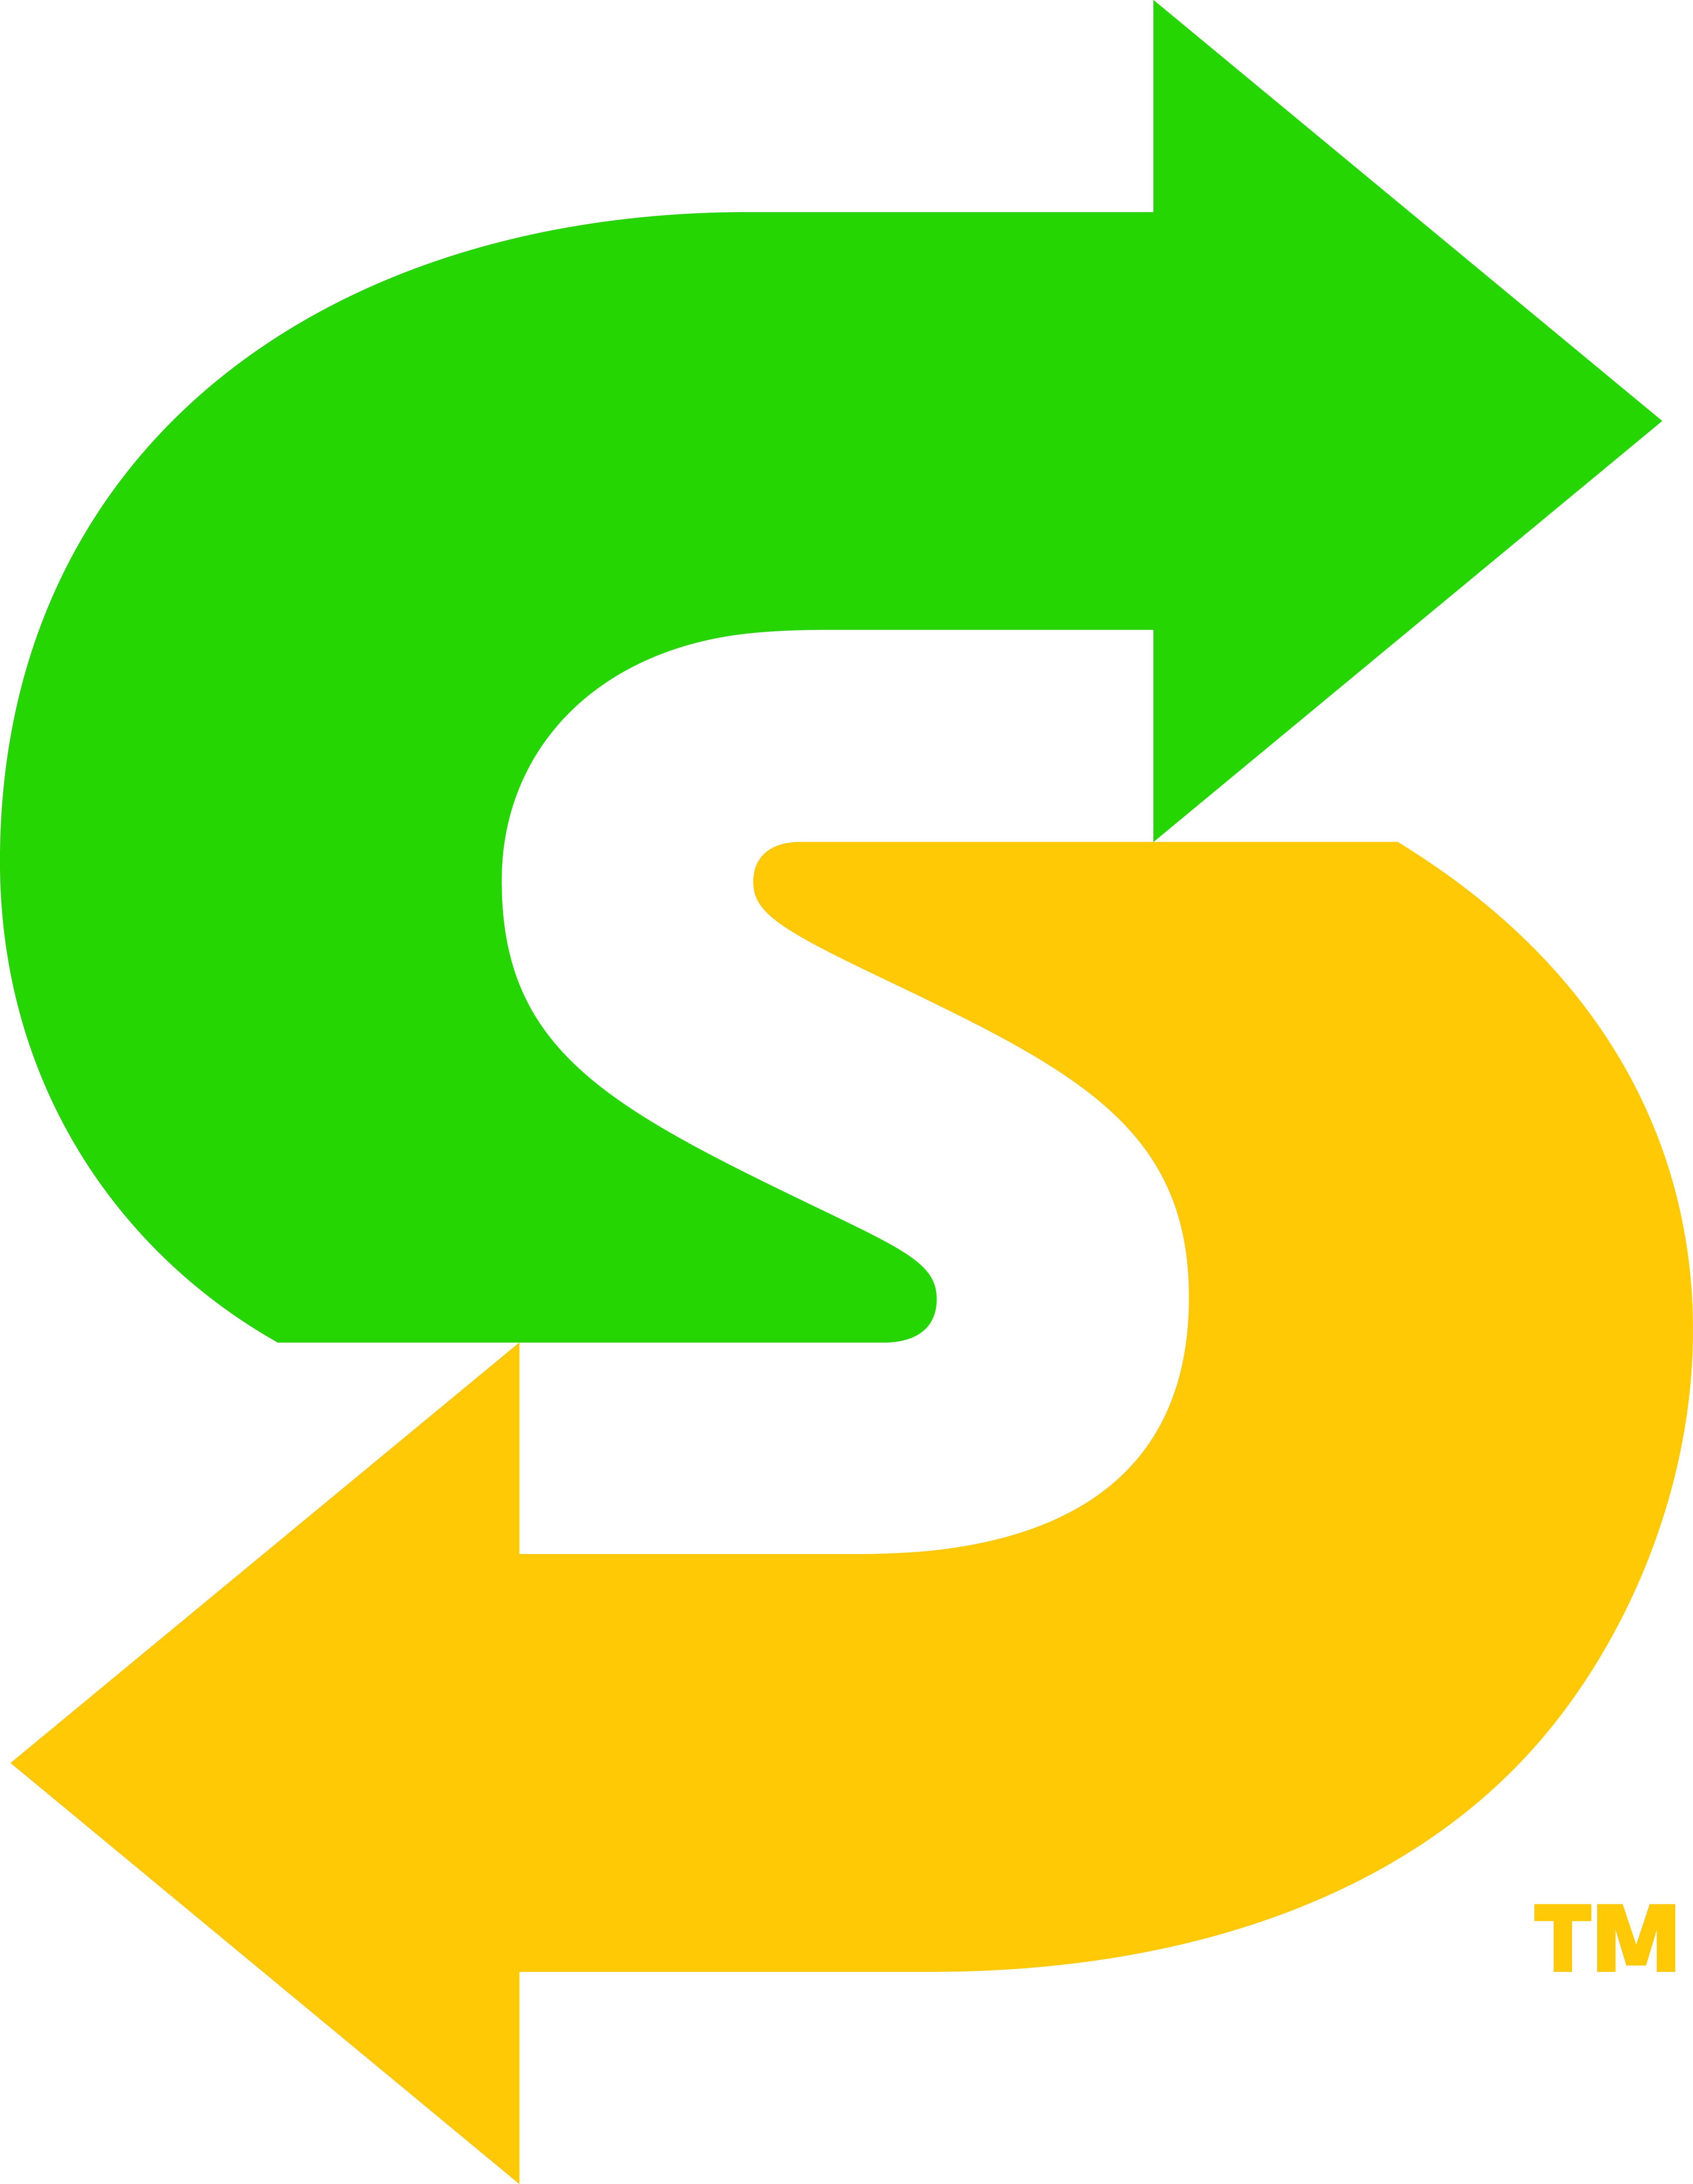 Subway Logo - Subway has a new logo for the first time in 15 years